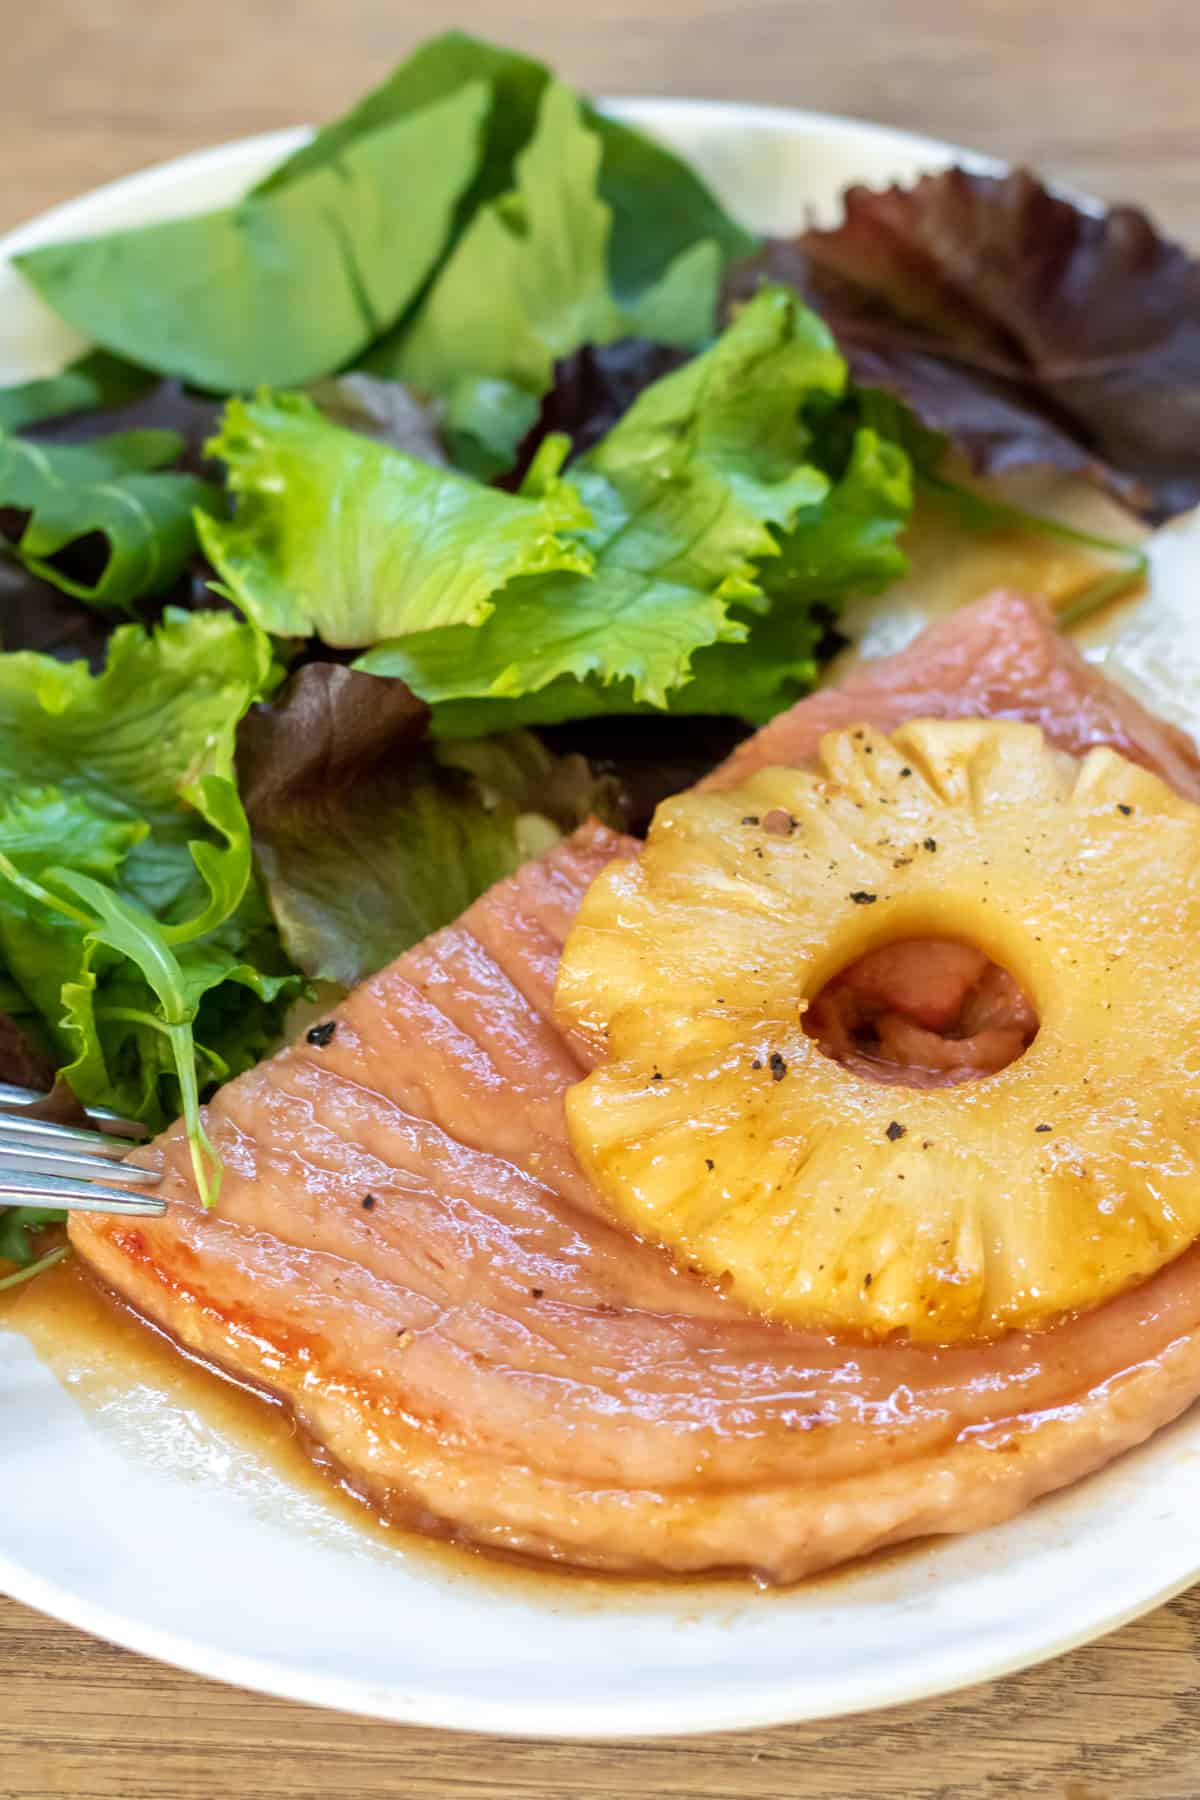 A plate with a glazed ham steak, pineapple and salad.